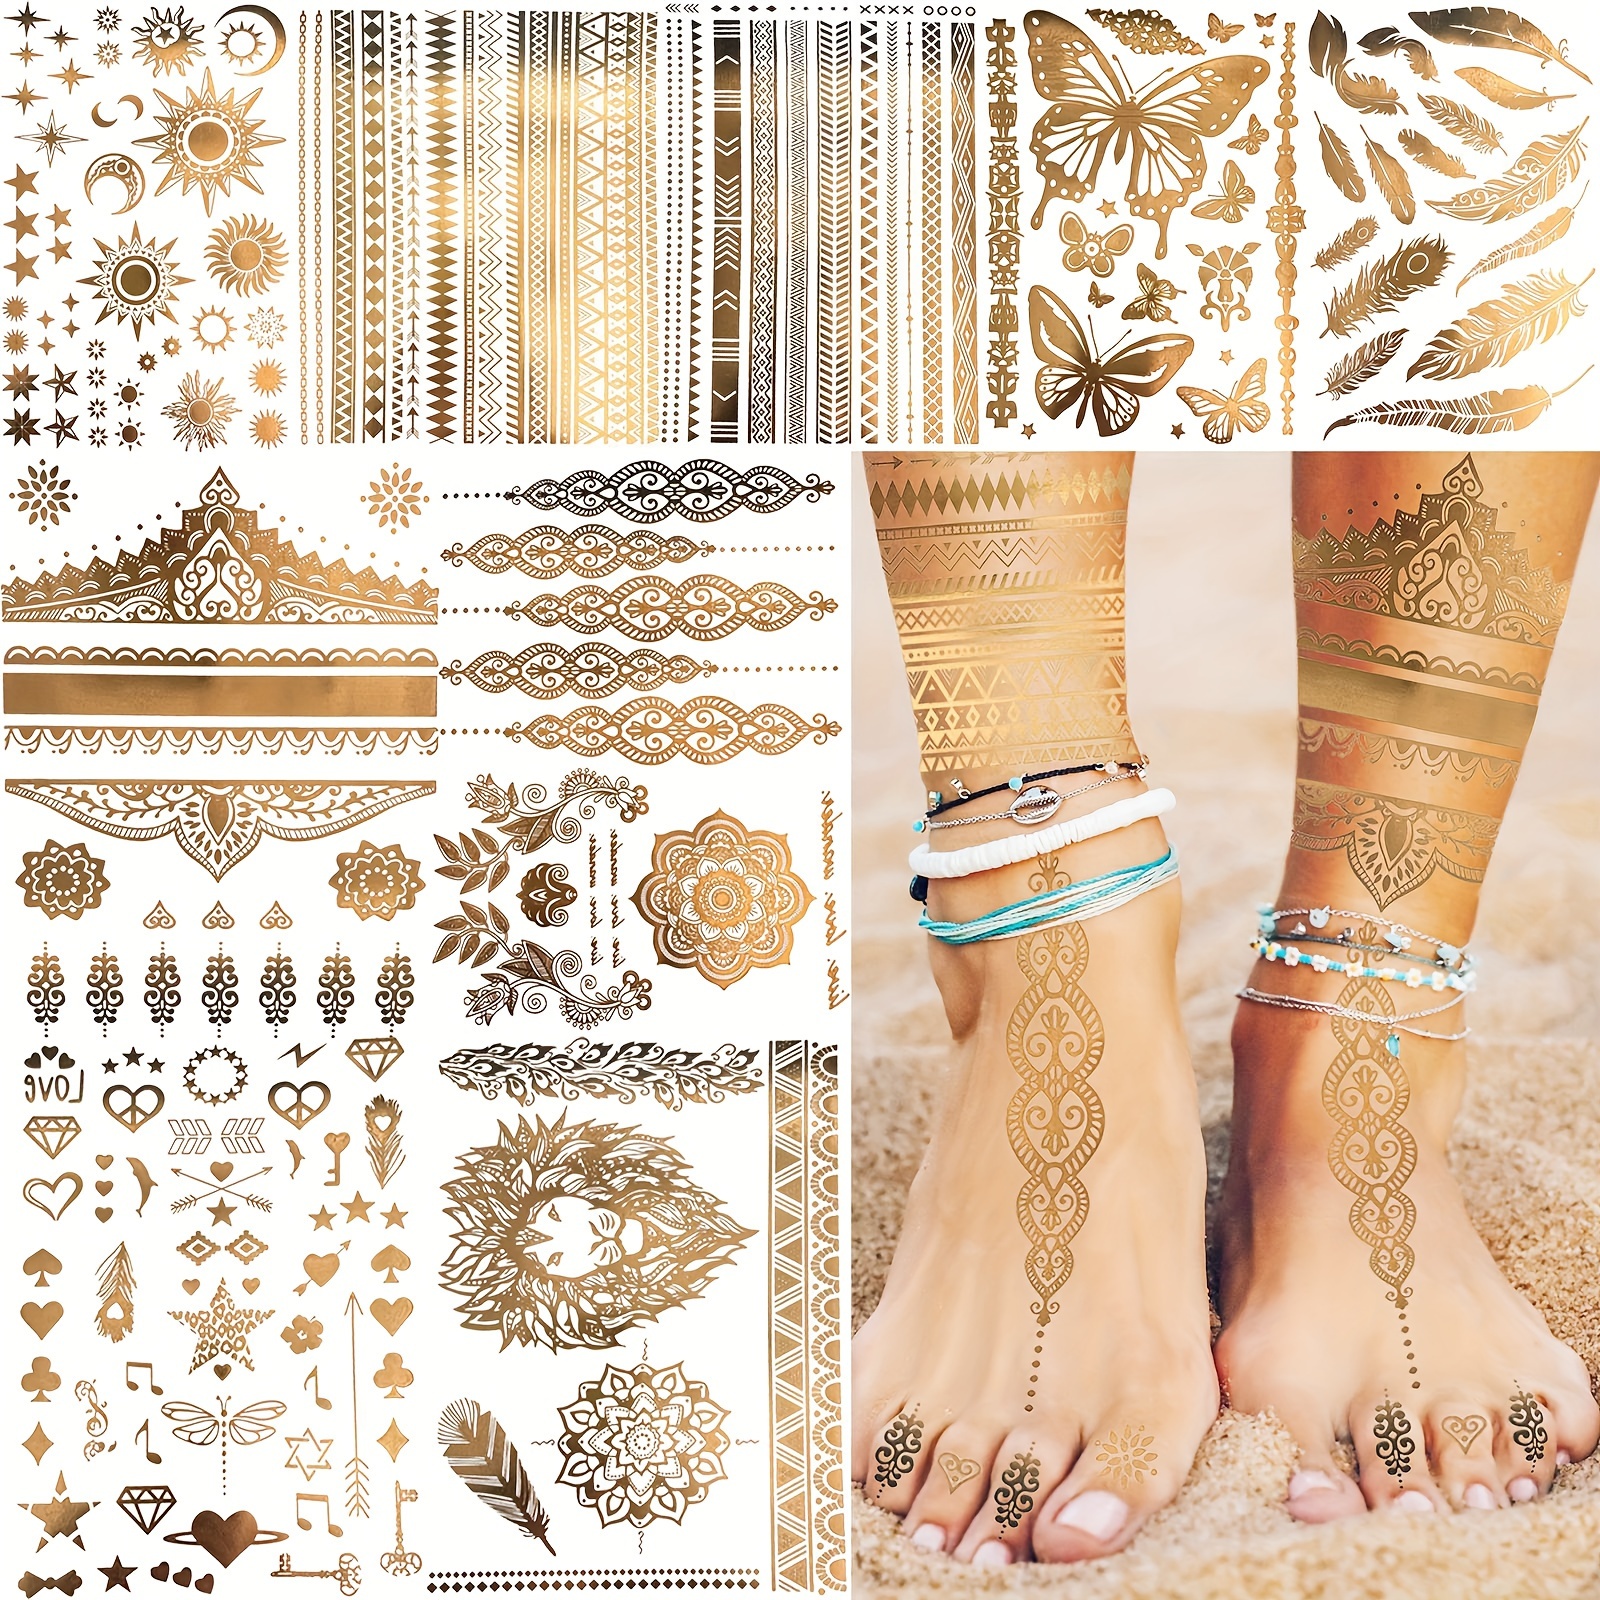 

9-sheet Metallic Temporary Tattoos In Gold - Waterproof Body Art Decals For Adults With Shimmering Lion, Butterfly, And , Long-lasting Fake Tattoo Stickers For Arms, Legs, And Body